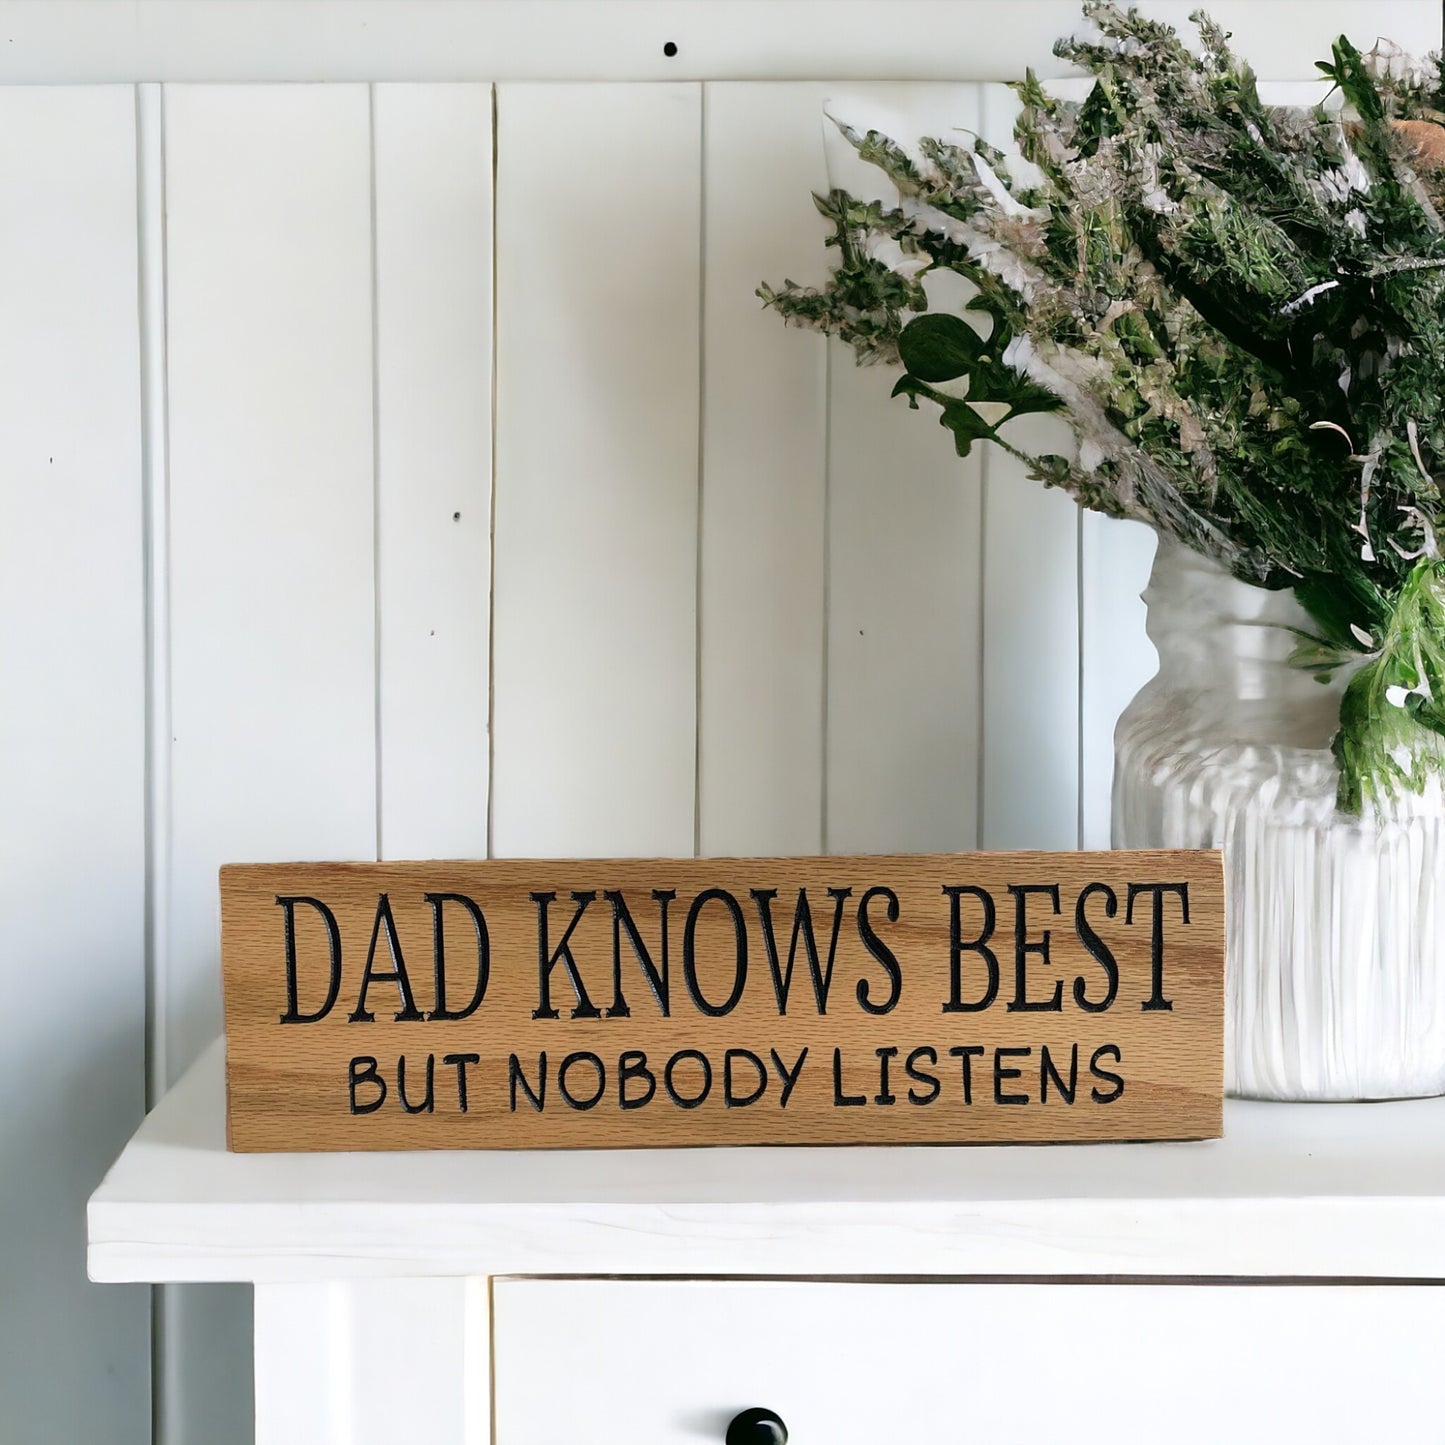 Dad Knows Best but Nobody Listens Carved Wood Sign, 3.5" x 12